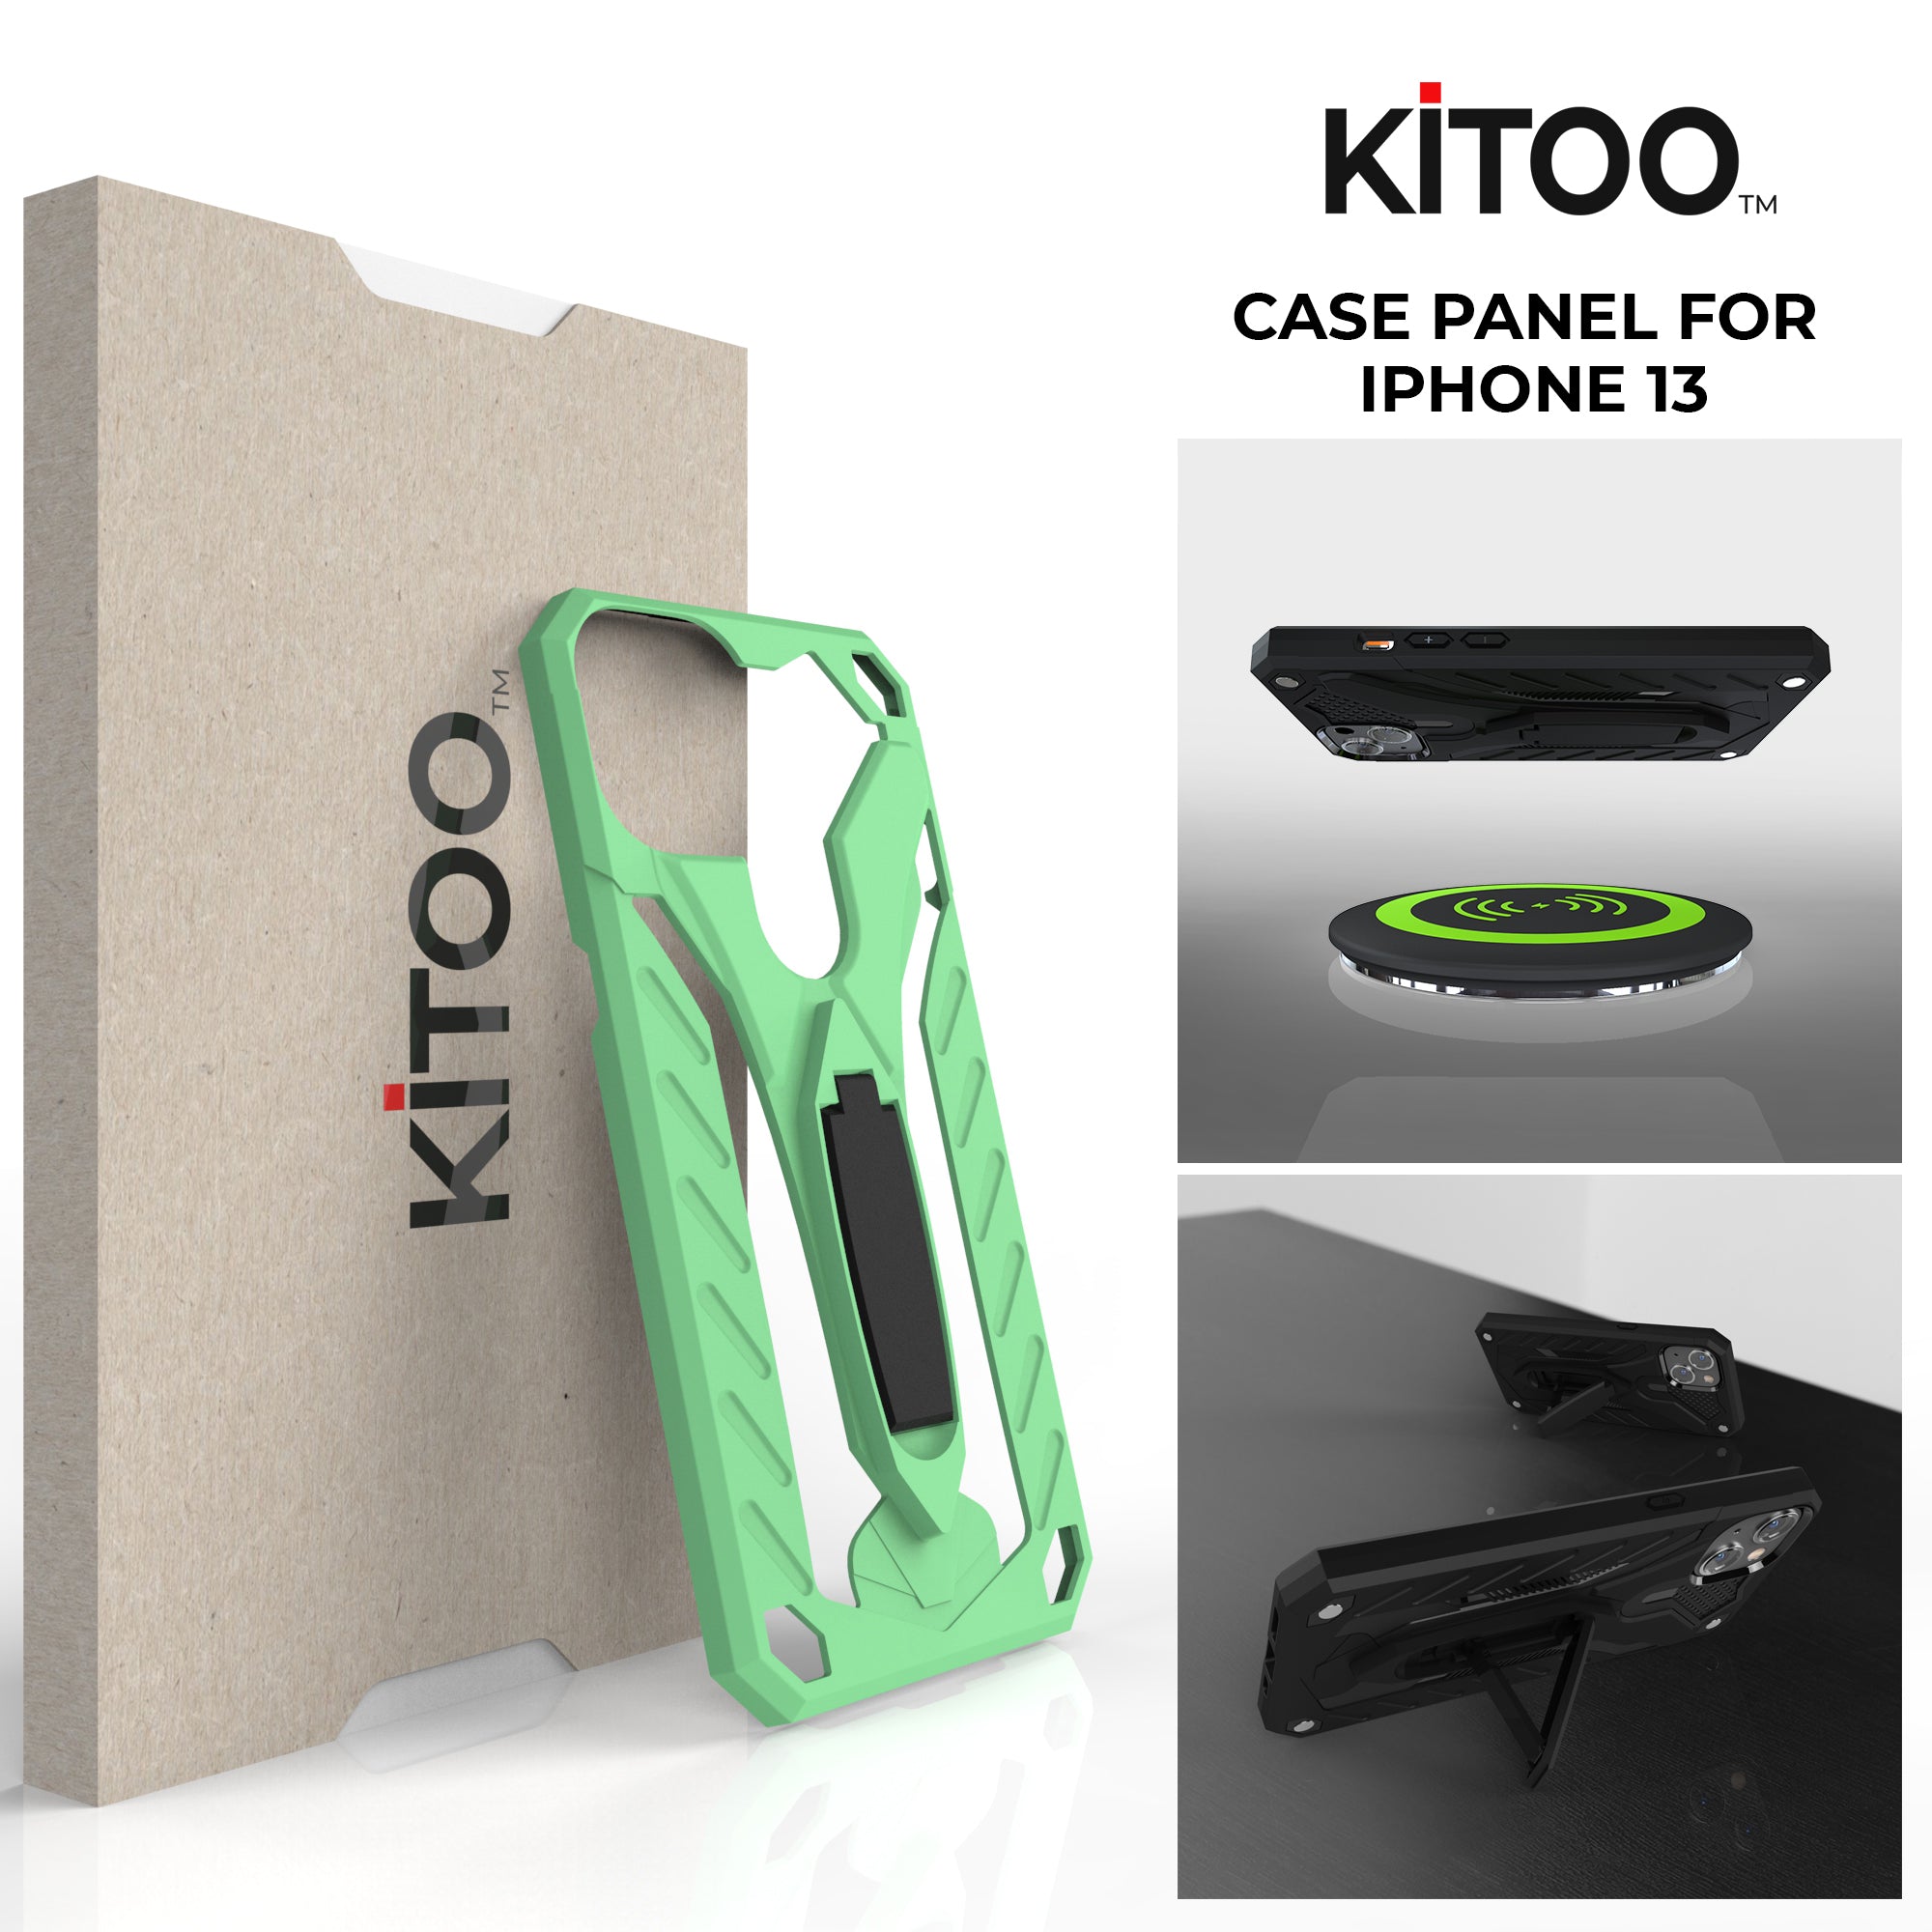 Kitoo Kickstand Panel Designed for iPhone 13 case (Spare Part only) - Green